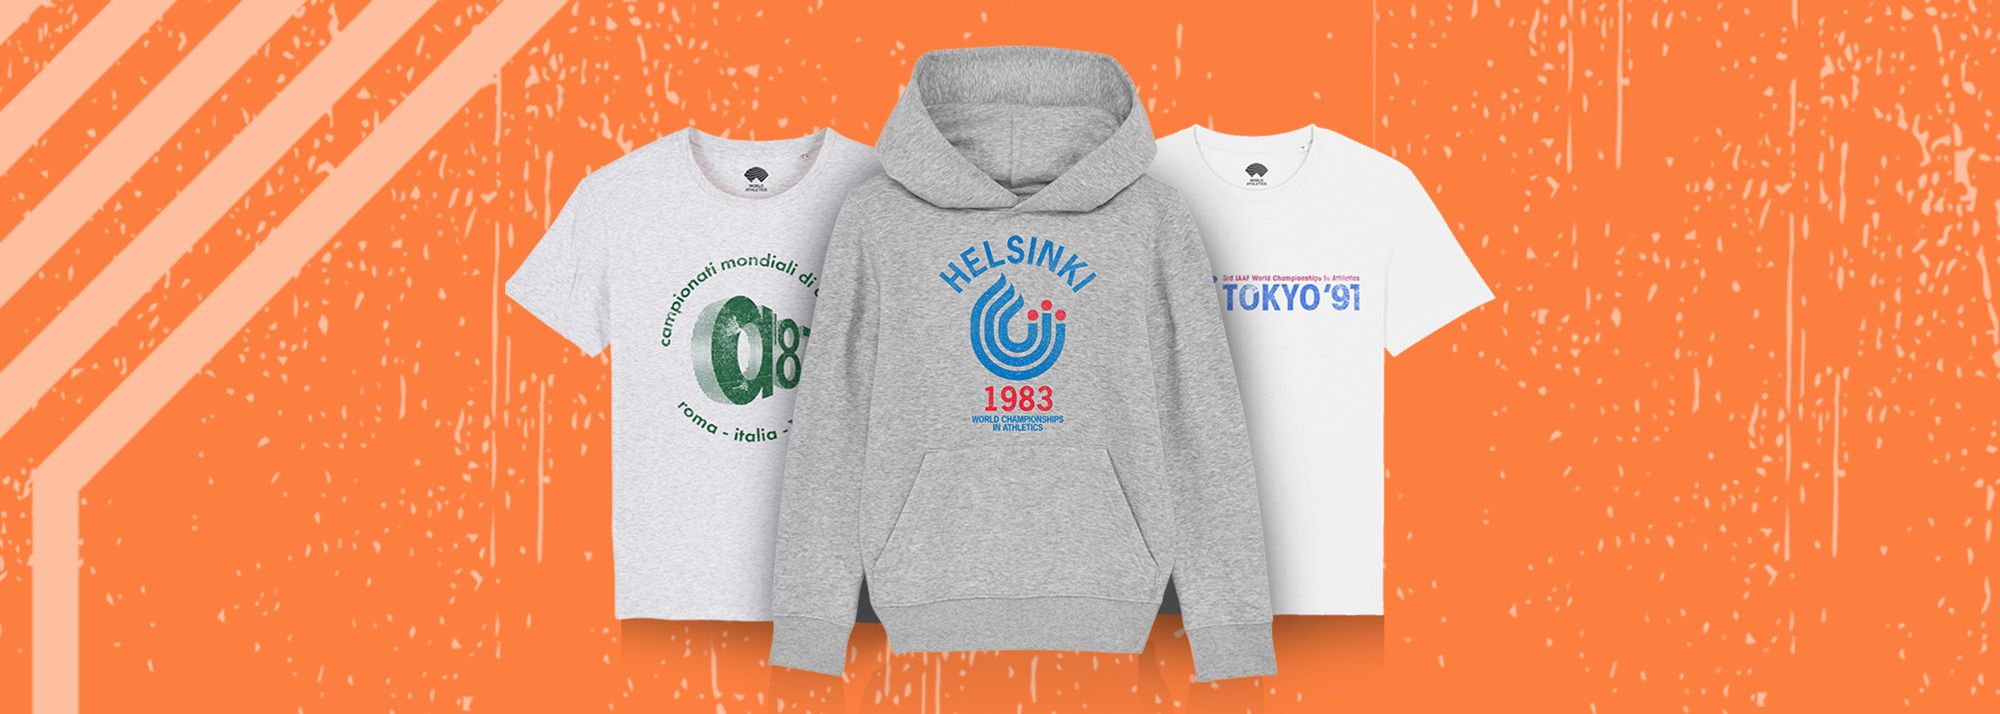 T-shirts, sweatshirts and hoodies feature iconic logos from the Helsinki 1983, Rome 1987 and Tokyo 1991 World Championships